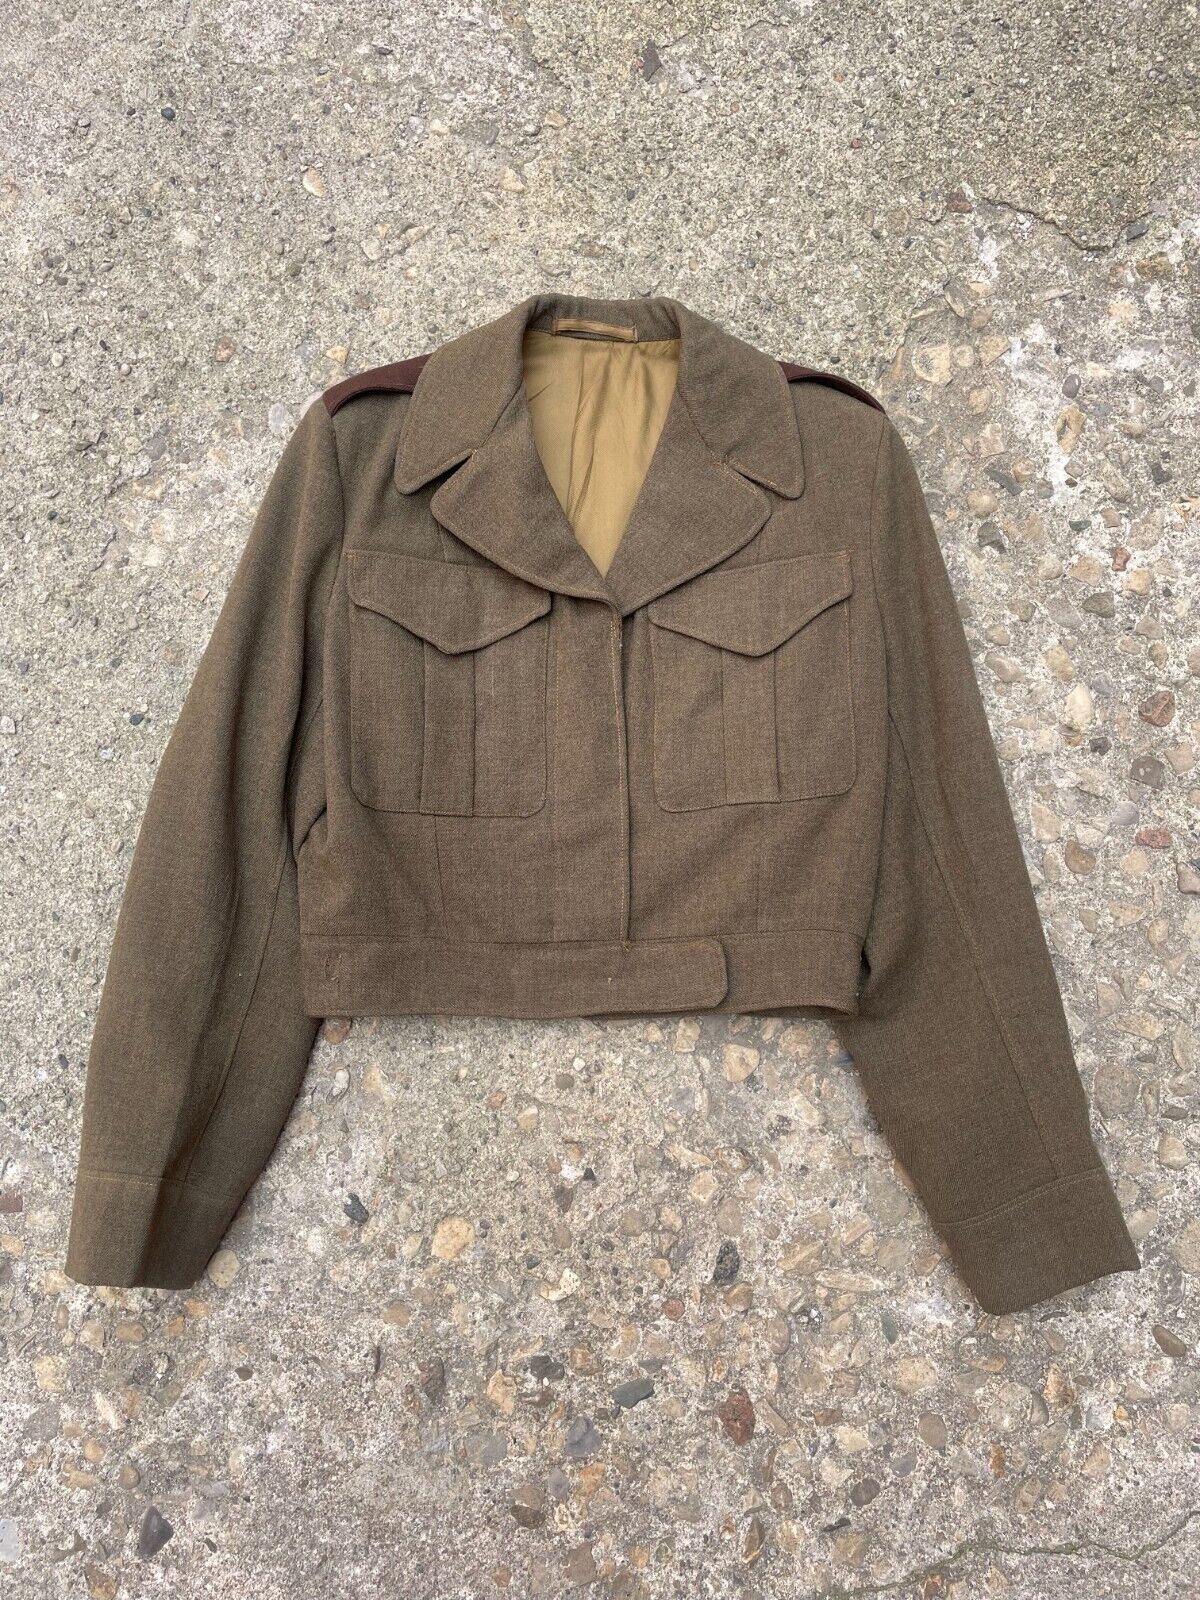 True Vintage 1952 Canadian Women\'s Army Corps CWAC Working Dress Jacket RARE